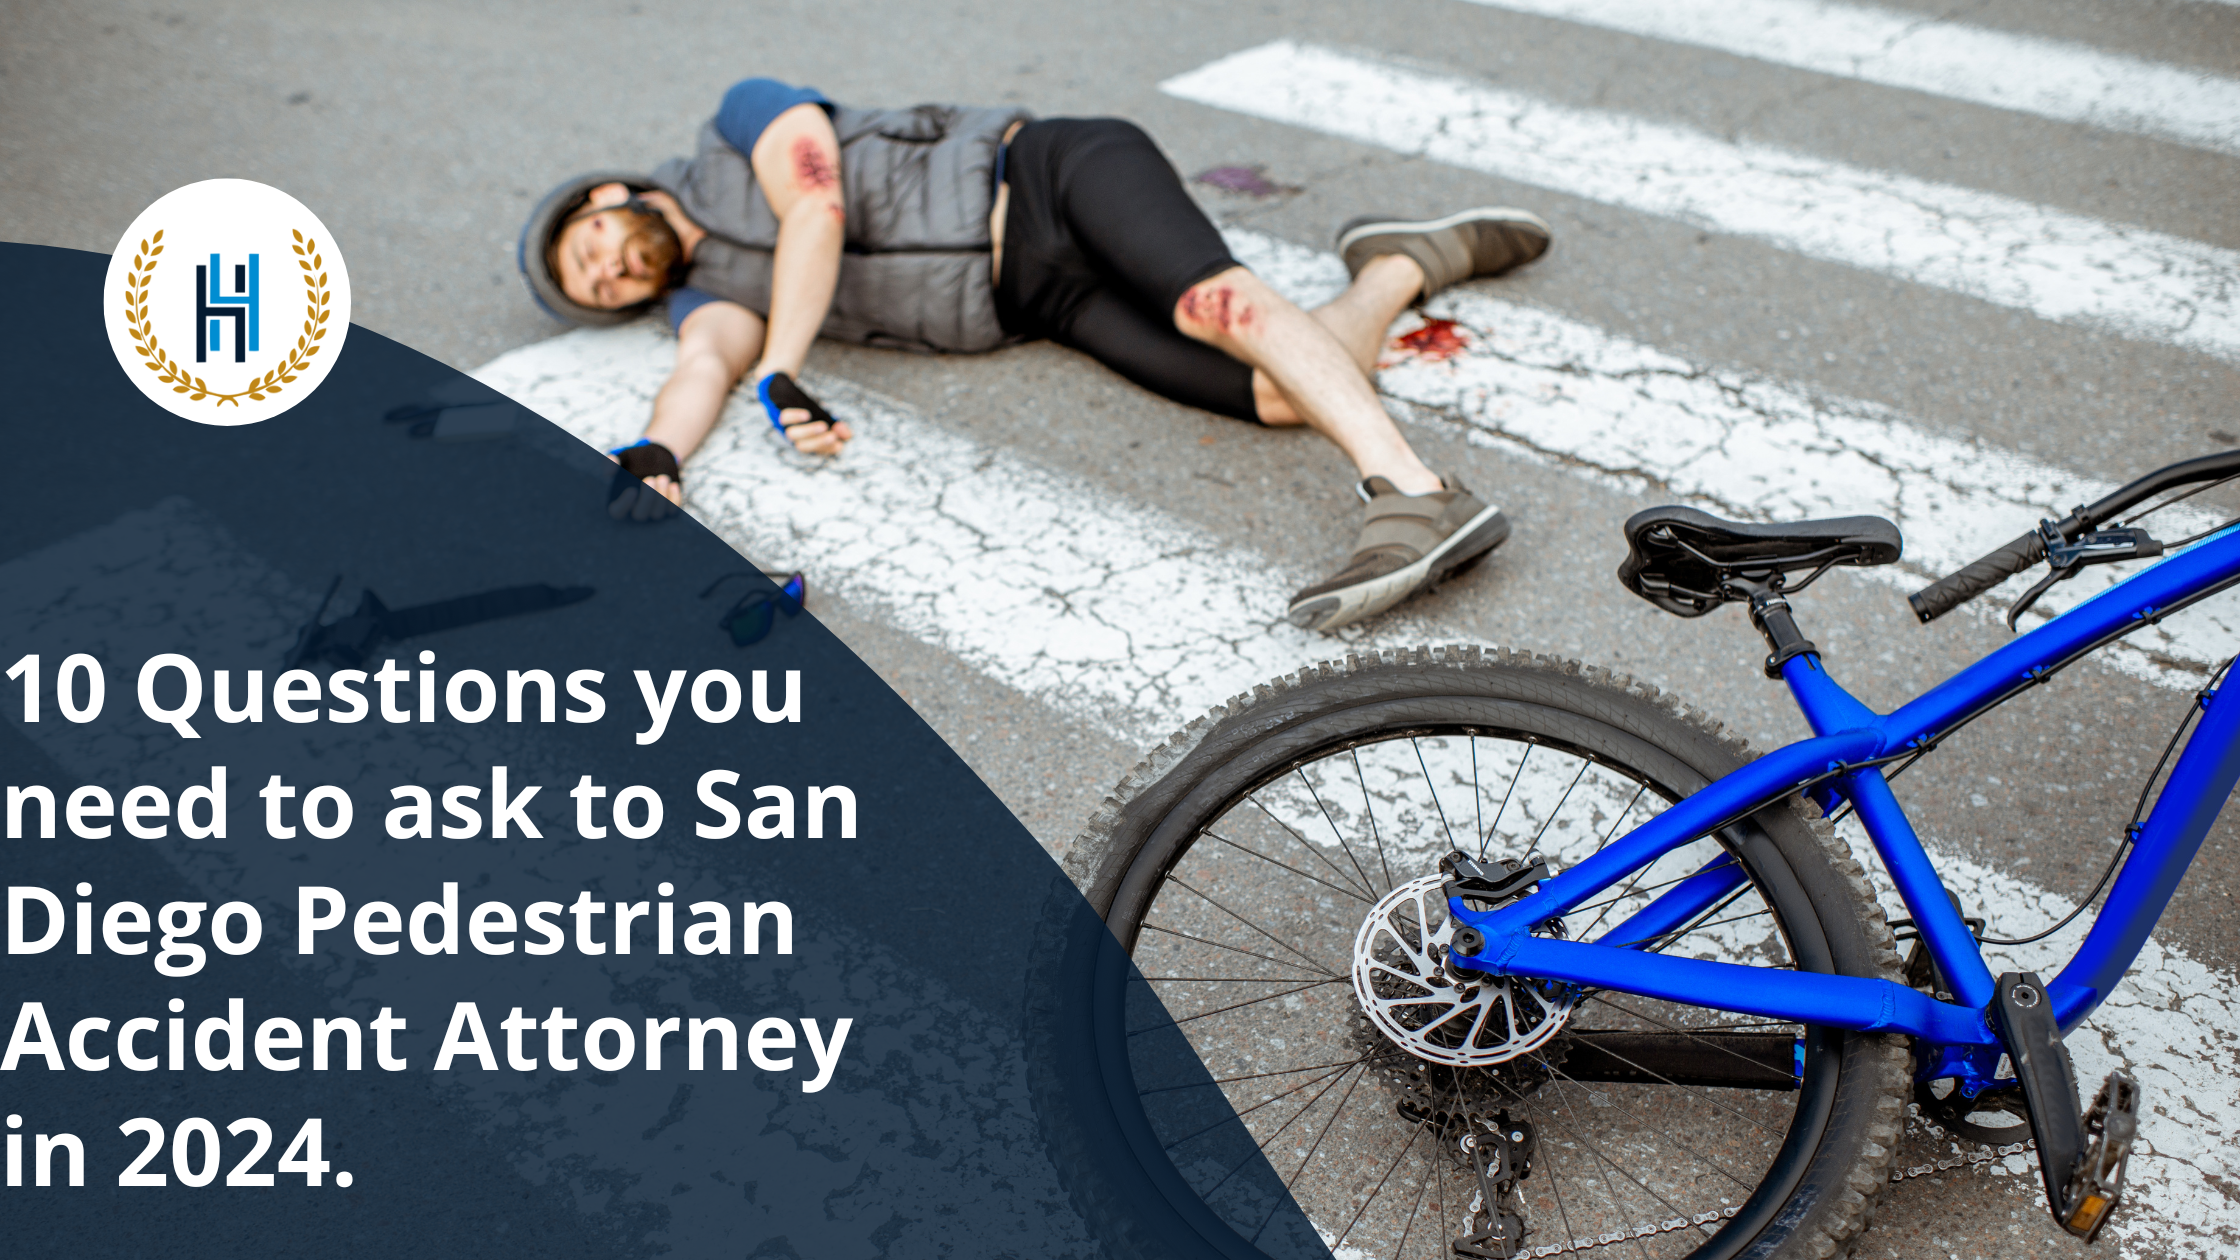 10 Questions you need to ask to San Diego Pedestrian Accident Attorney in 2024. | 2H Law Firm